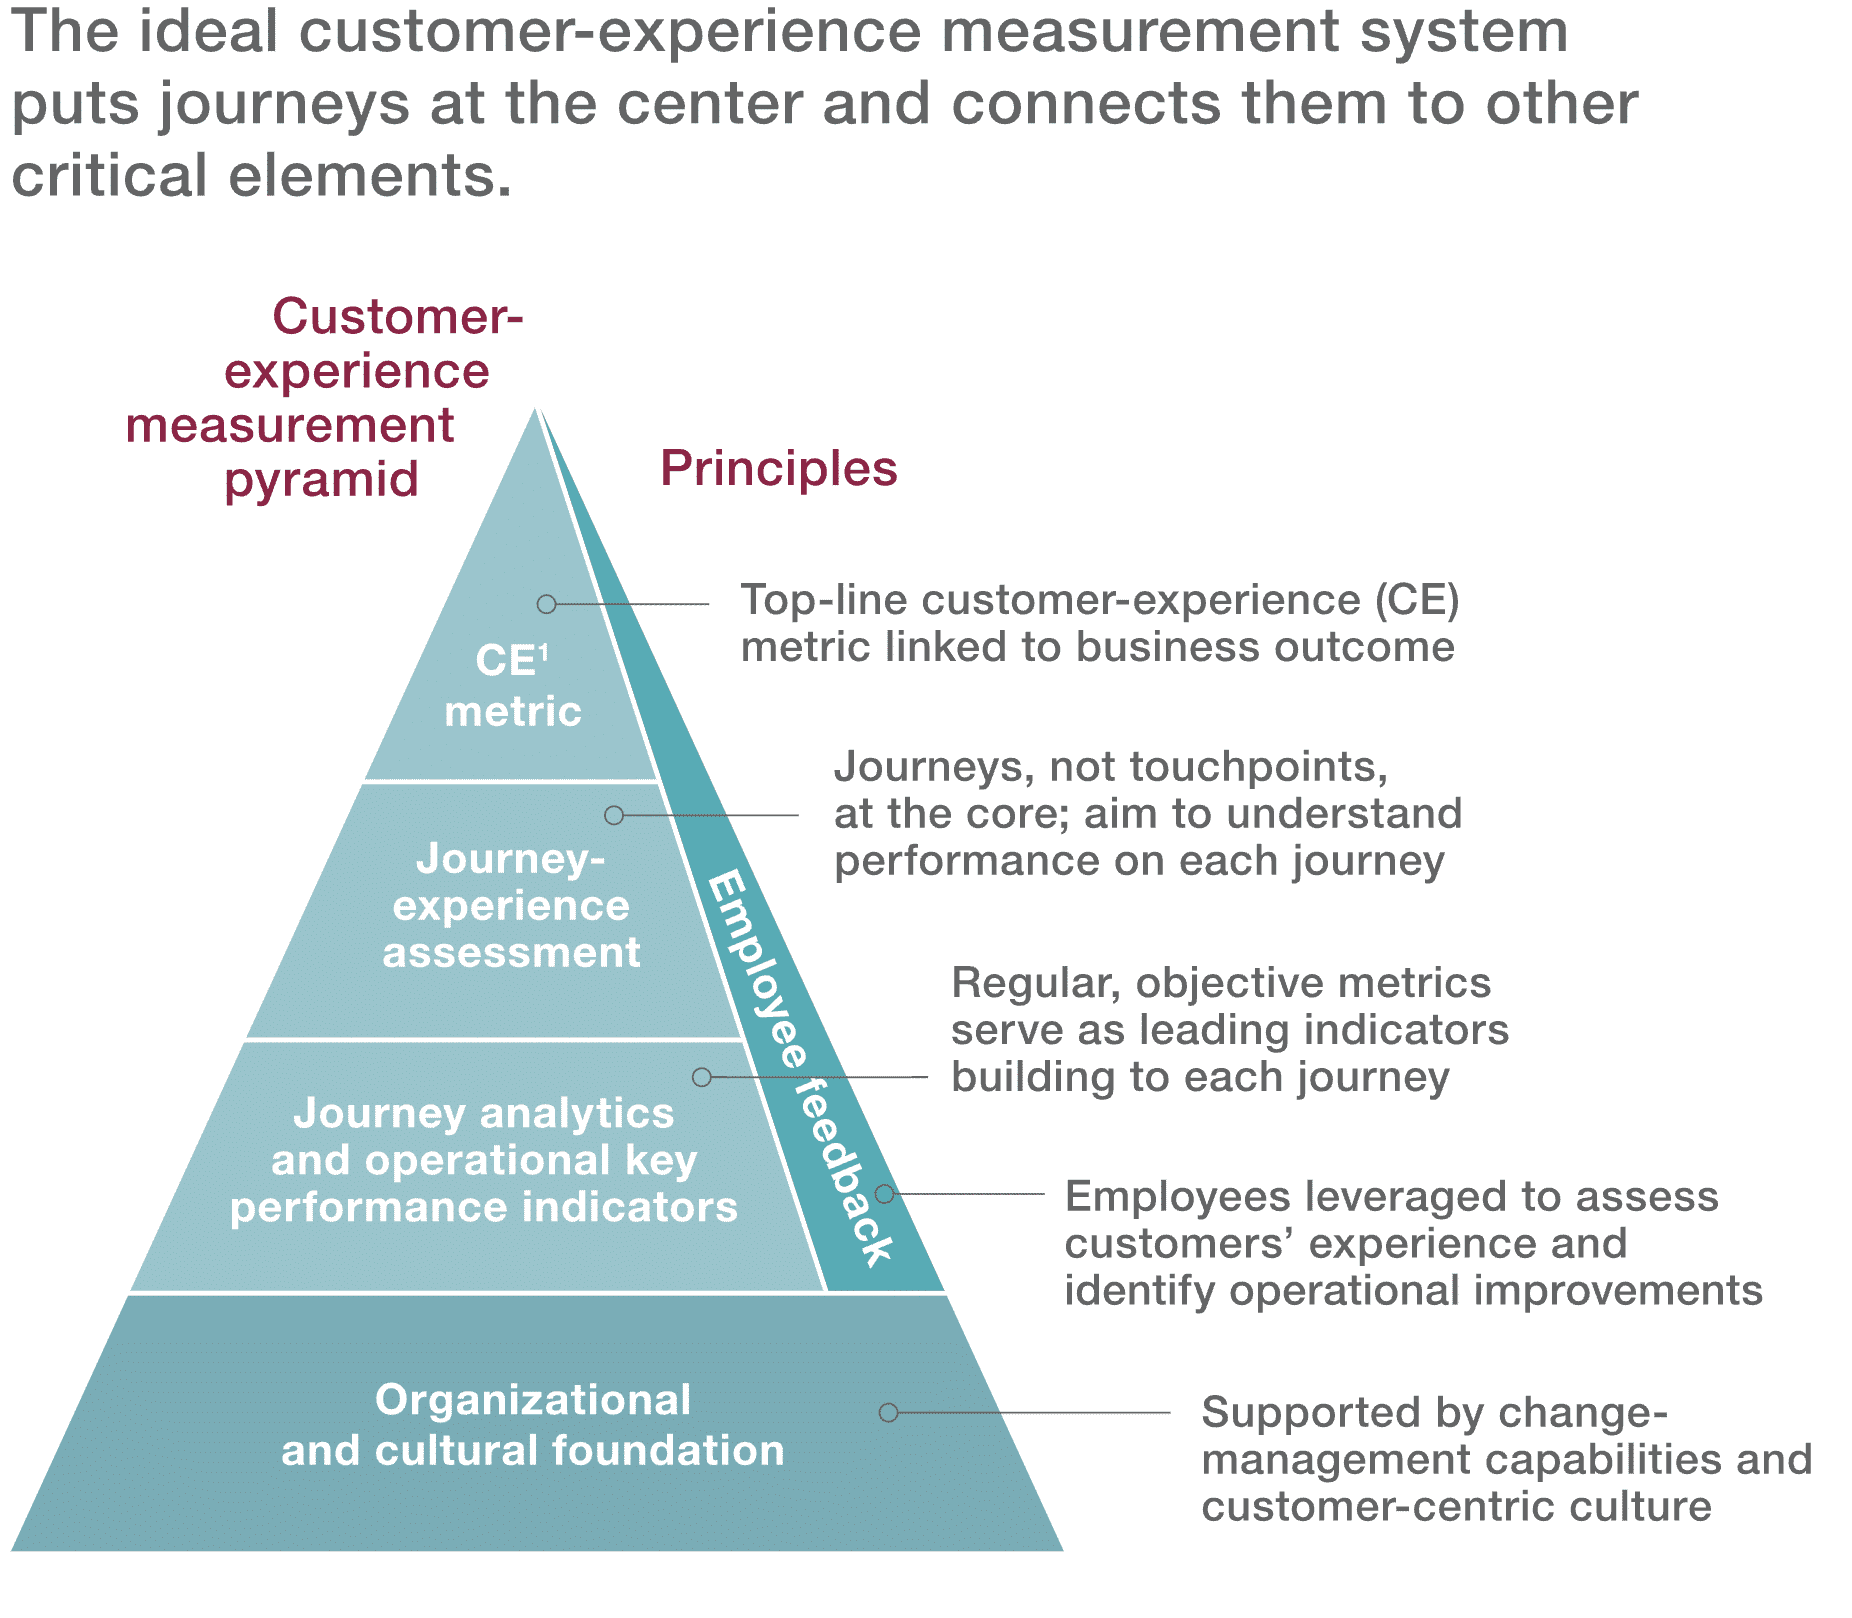 graphic outlines McKinsey’s ideal customer-experience measurement system